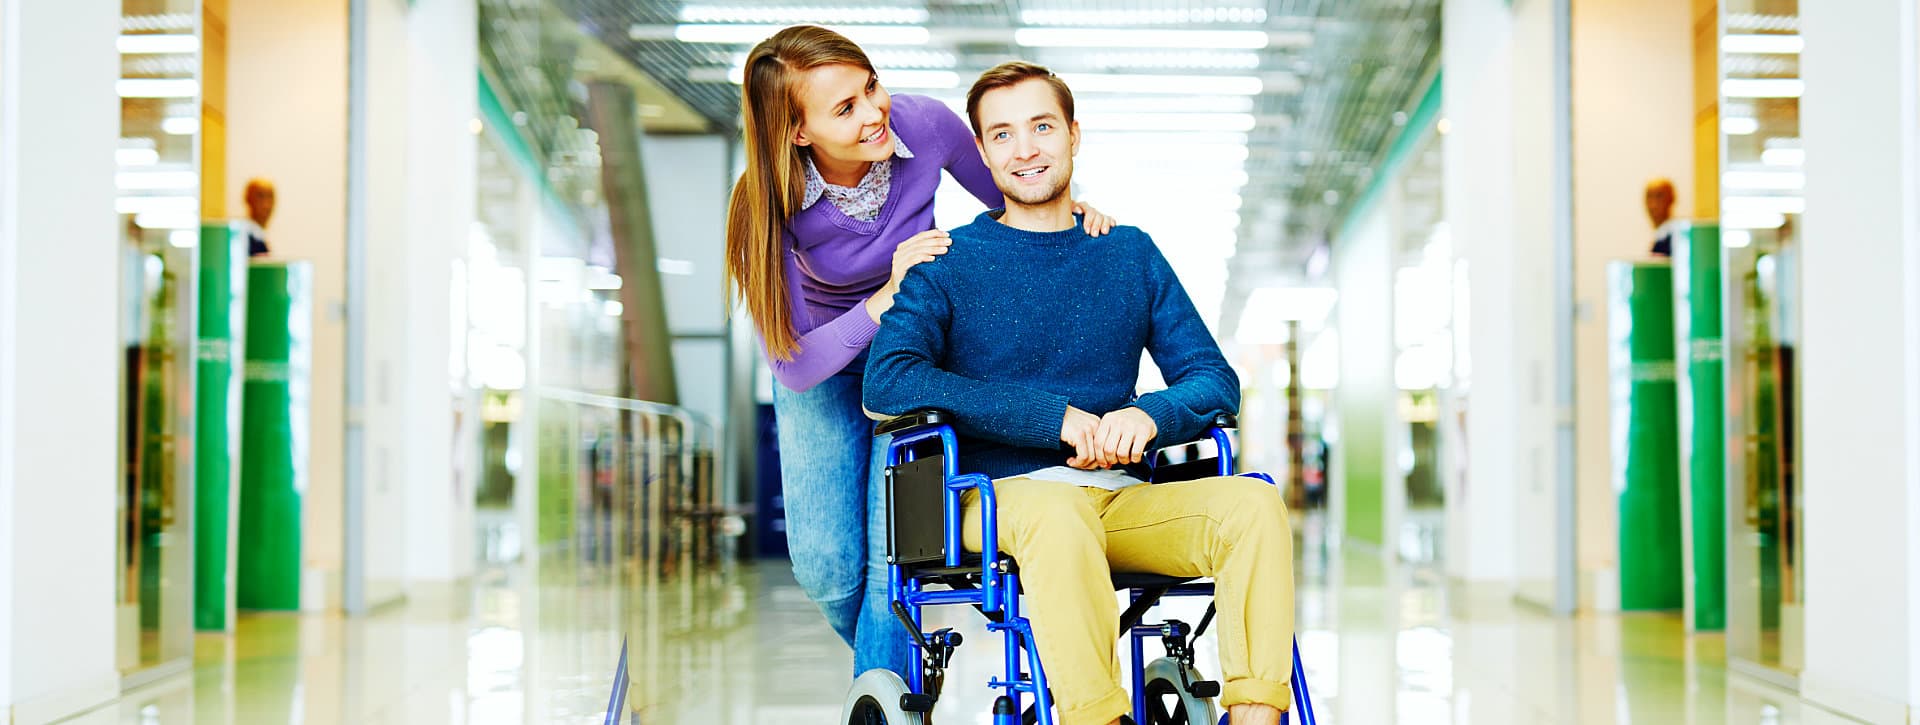 portrait of a woman and a man in a wheelchair